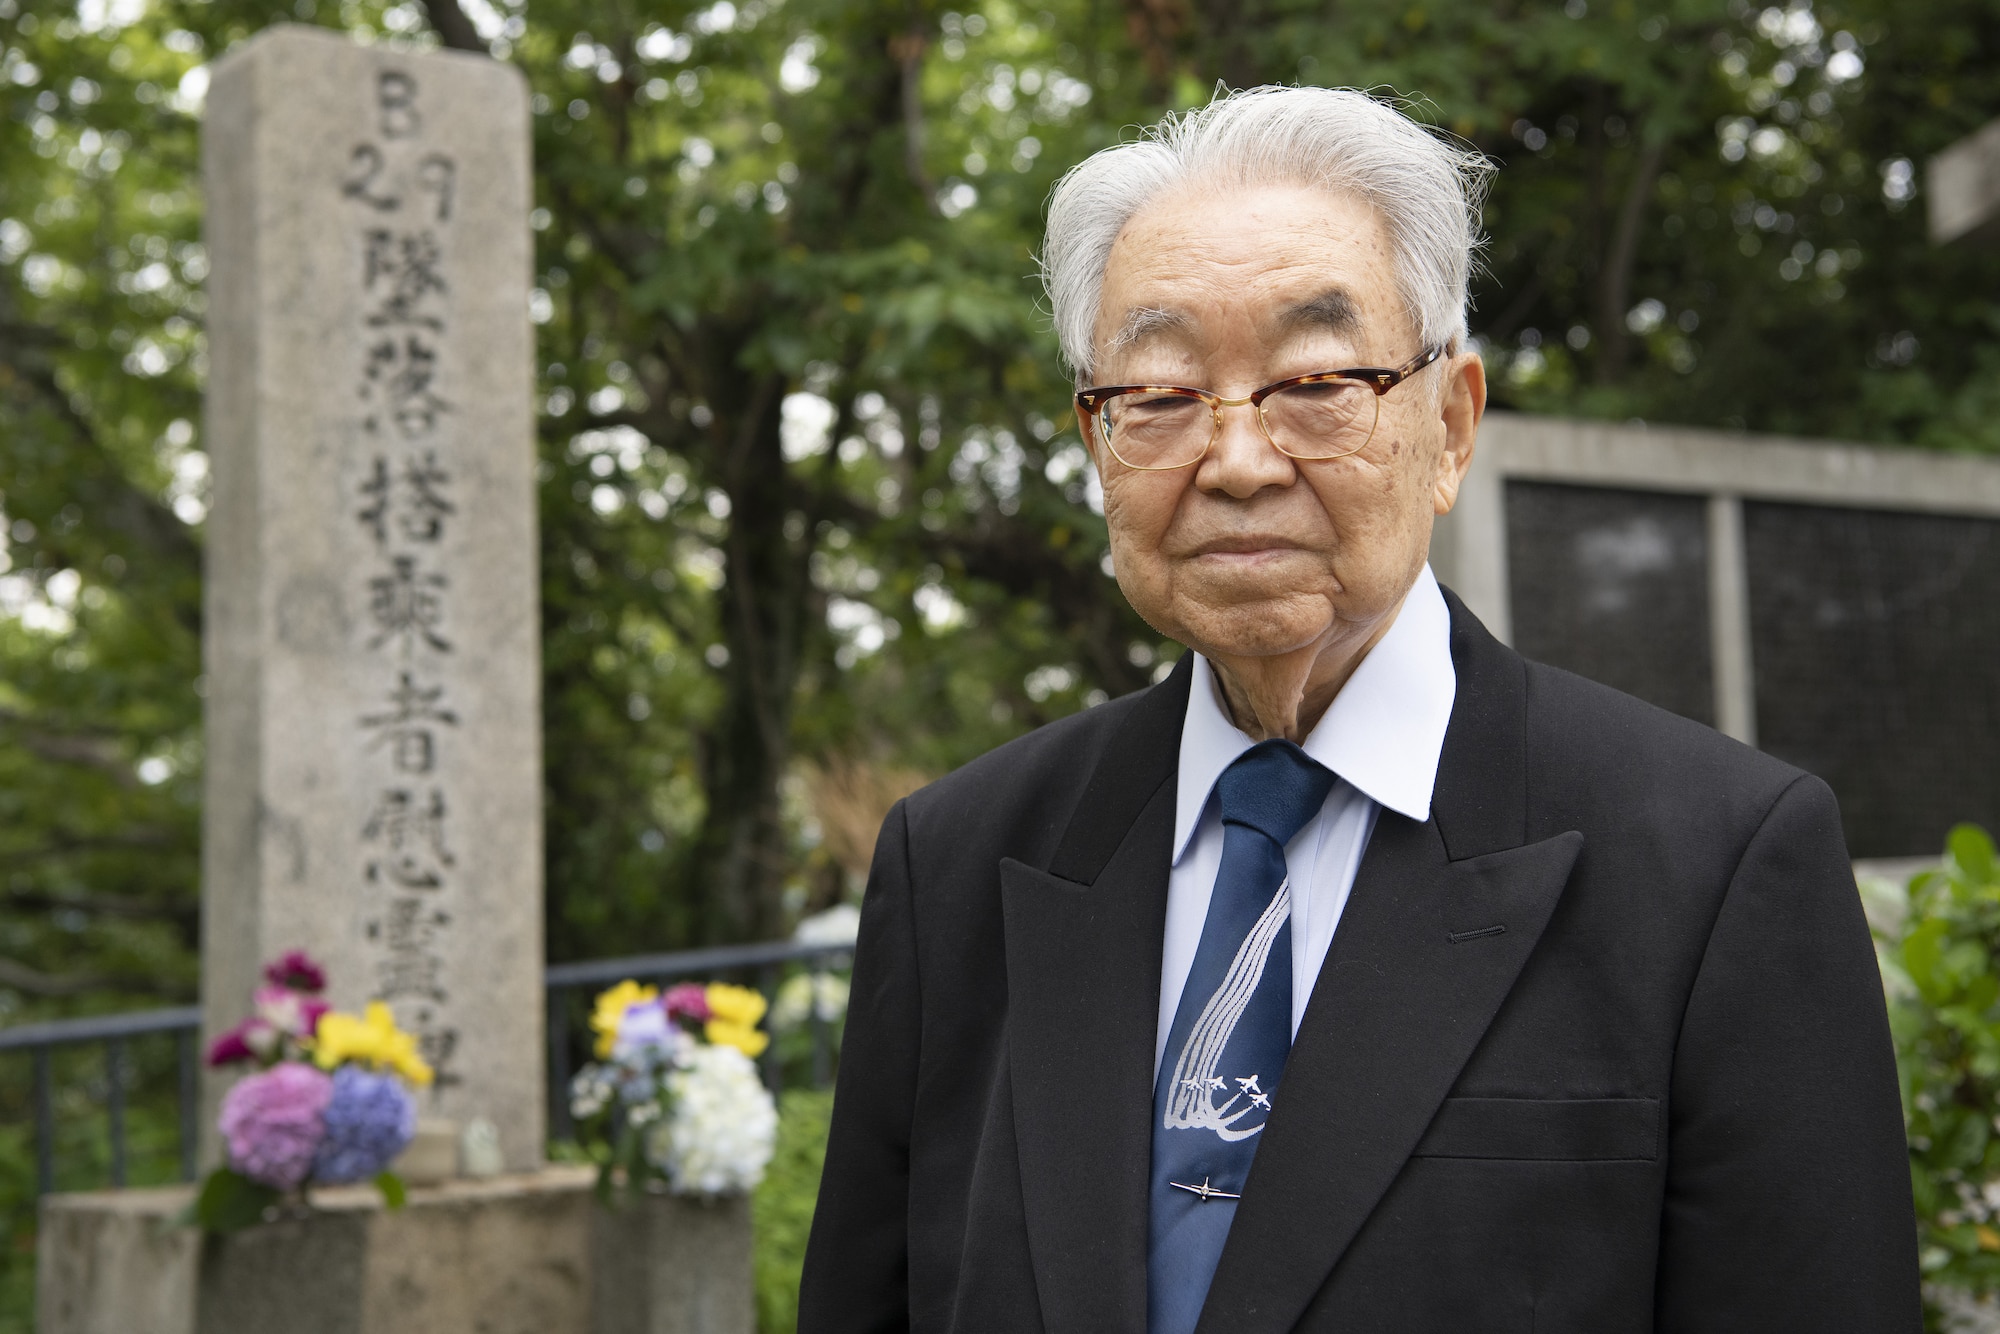 Dr. Hiroya Sugano, ceremony host, stands in front of a B-29 Monument during a U.S.-Japan Joint Memorial Service June 11, 2022, at Mt. Shizuhata in Shizuoka city, Japan. The memorial service provided participants the opportunity to honor those who lost their lives during a World War II air raid on June 20, 1945. During the raid, two U.S. Army Air Forces B-29 Superfortresses collided mid-air over Shizuoka City, resulting in the death of 23 Airmen on board the aircraft. Representatives of the U.S. Air Force’s Yokota Air Base, Japan Self Defense Force, and Shizuoka City rendered their respects to the Airmen and Japanese civilians who lost their lives as a result of the tragedy, and reflected on the strong alliance the U.S. and Japan have forged since the end of World War II. (U.S. Air Force photo by Tech. Sgt. Christopher Hubenthal)